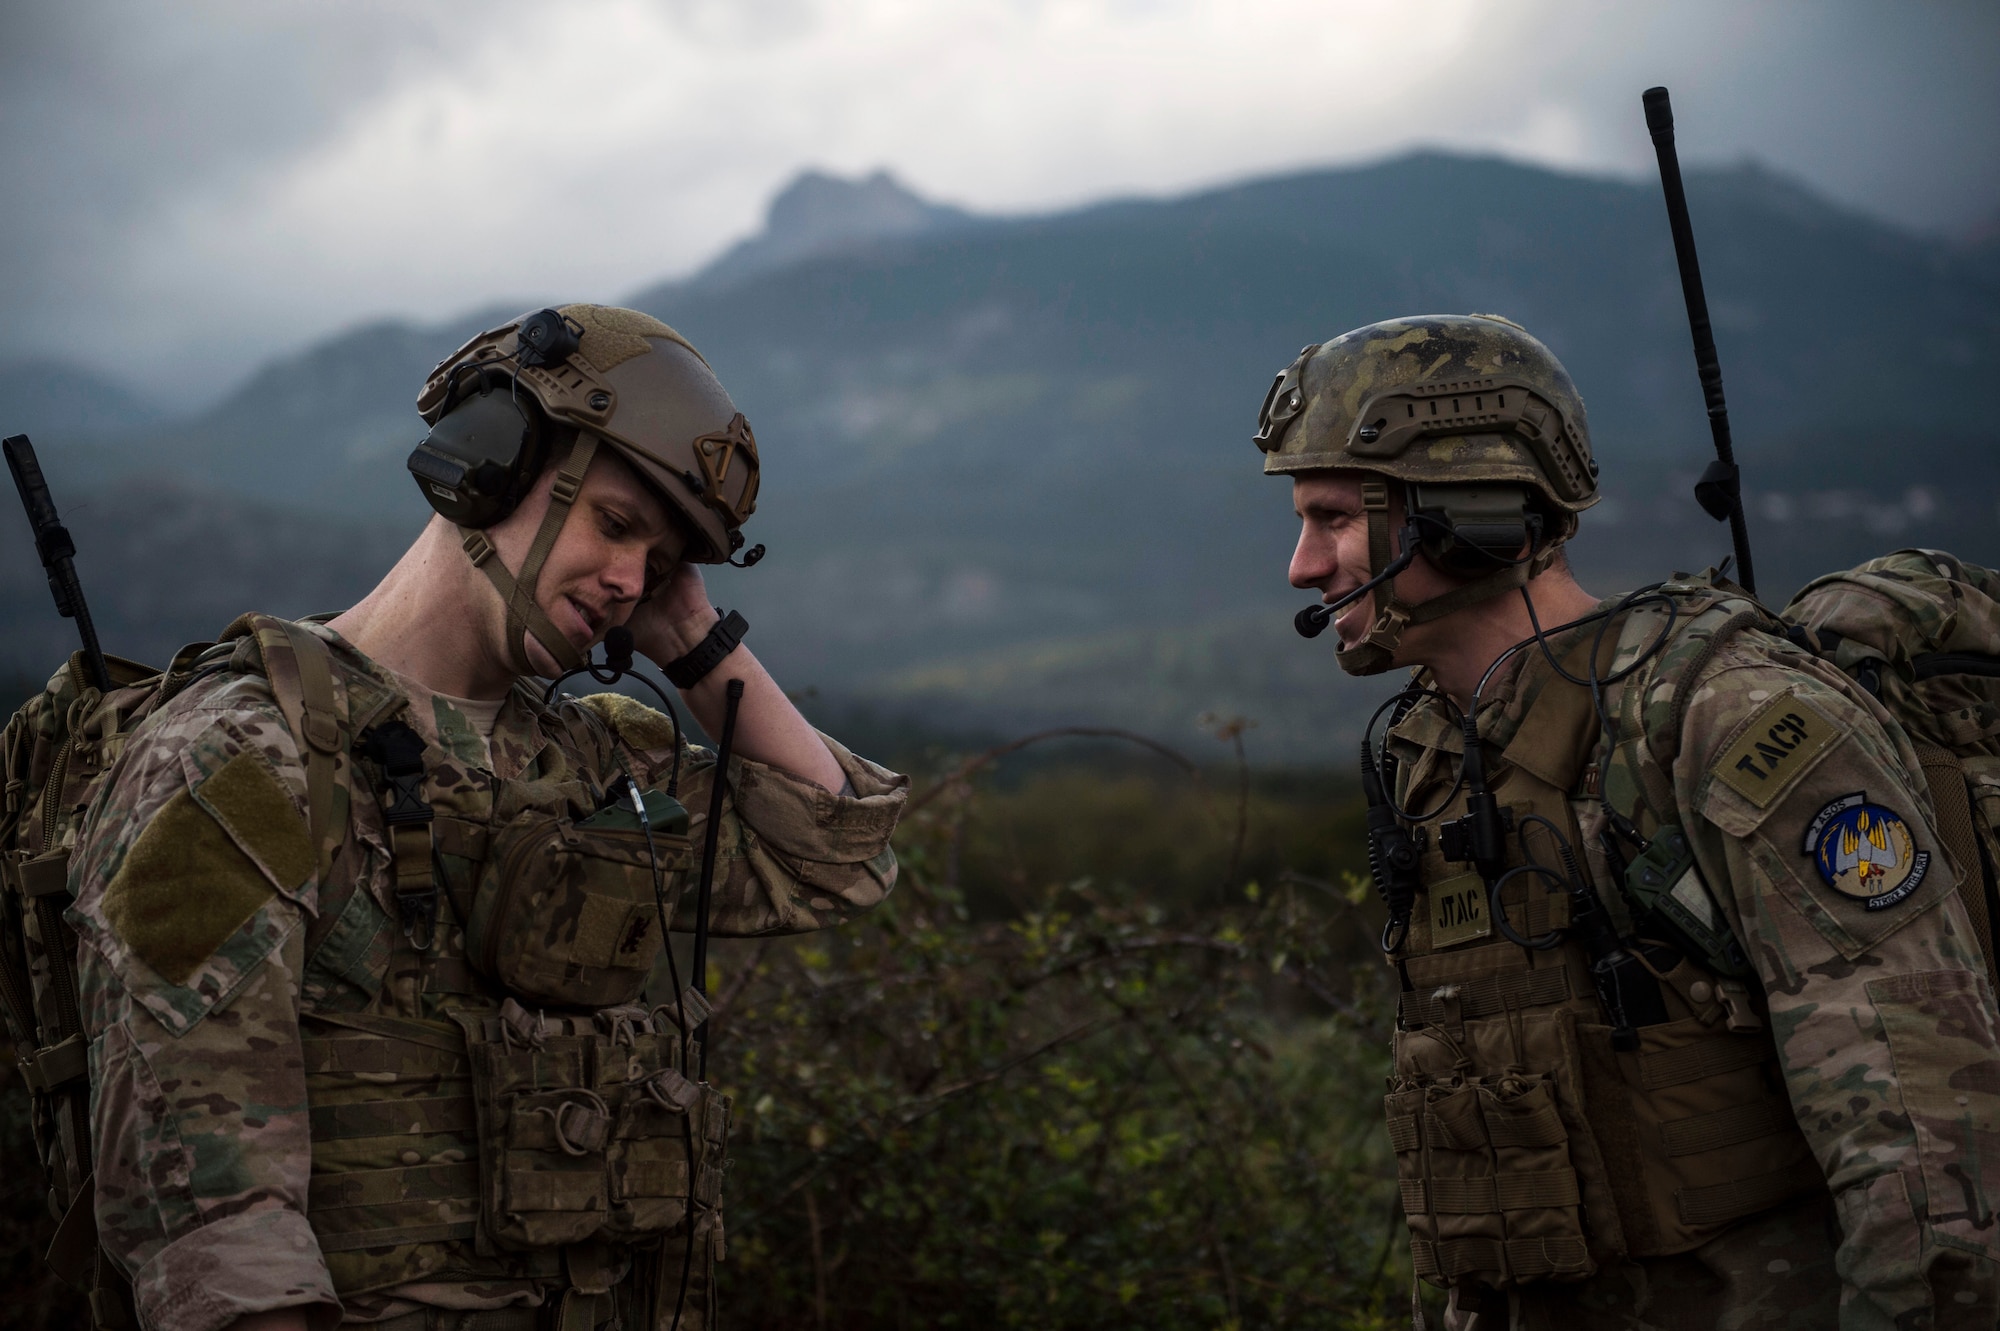 Senior Airman Tormod Lillekroken and Staff Sgt. Seth Hunt, 2nd Air Support Operations Squadron joint terminal attack controllers, talk about a training scenario during Exercise Serpentex ‘16 in Corsica, France, March 15, 2016. Approximately 215 U.S. Air Force Airmen, including four JTACs from the 2nd ASOS, participated in an annual exercise held at NATO’s tactical training center and the French air force’s Air Base 126 Solenzara . (U.S. Air Force photo/Staff Sgt. Sara Keller)